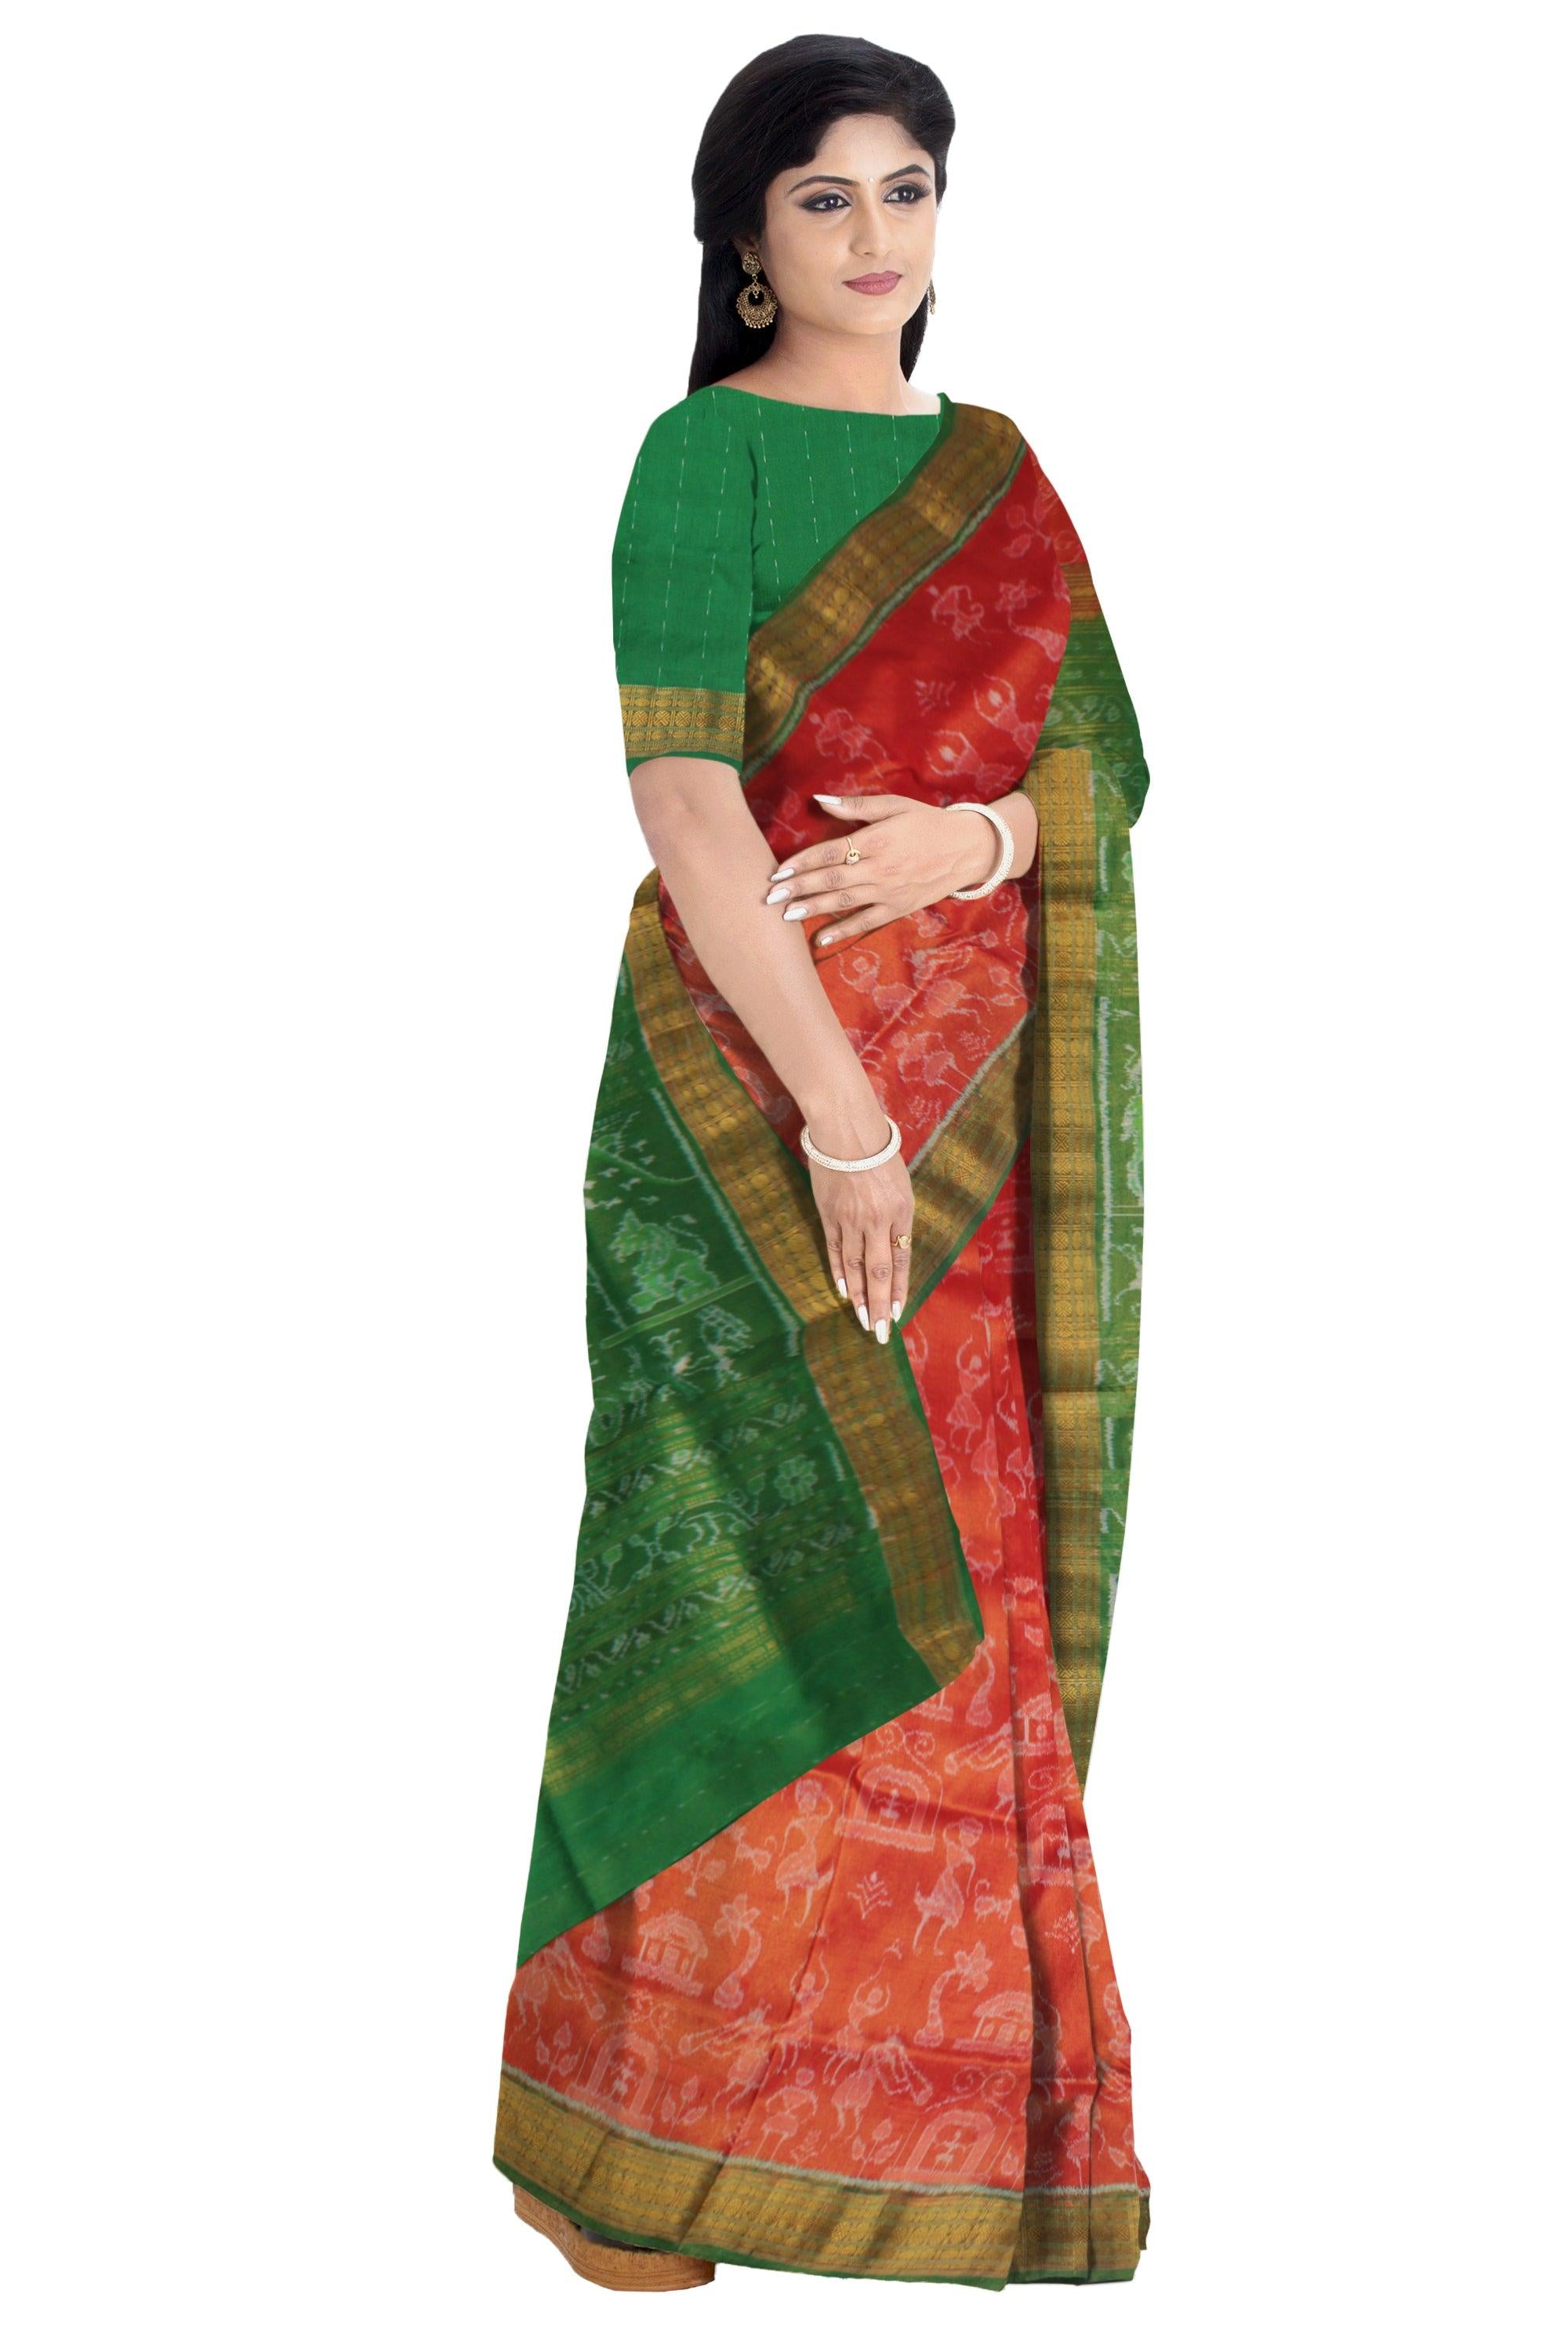 TRADITIONAL VILLAGE PATTERN PURE TISSUE SILK SAREE IS DARK-ORANGE AND GREEN COLOR BASE, COMES WITH ,MATCHING BLOUSE PIECE. - Koshali Arts & Crafts Enterprise